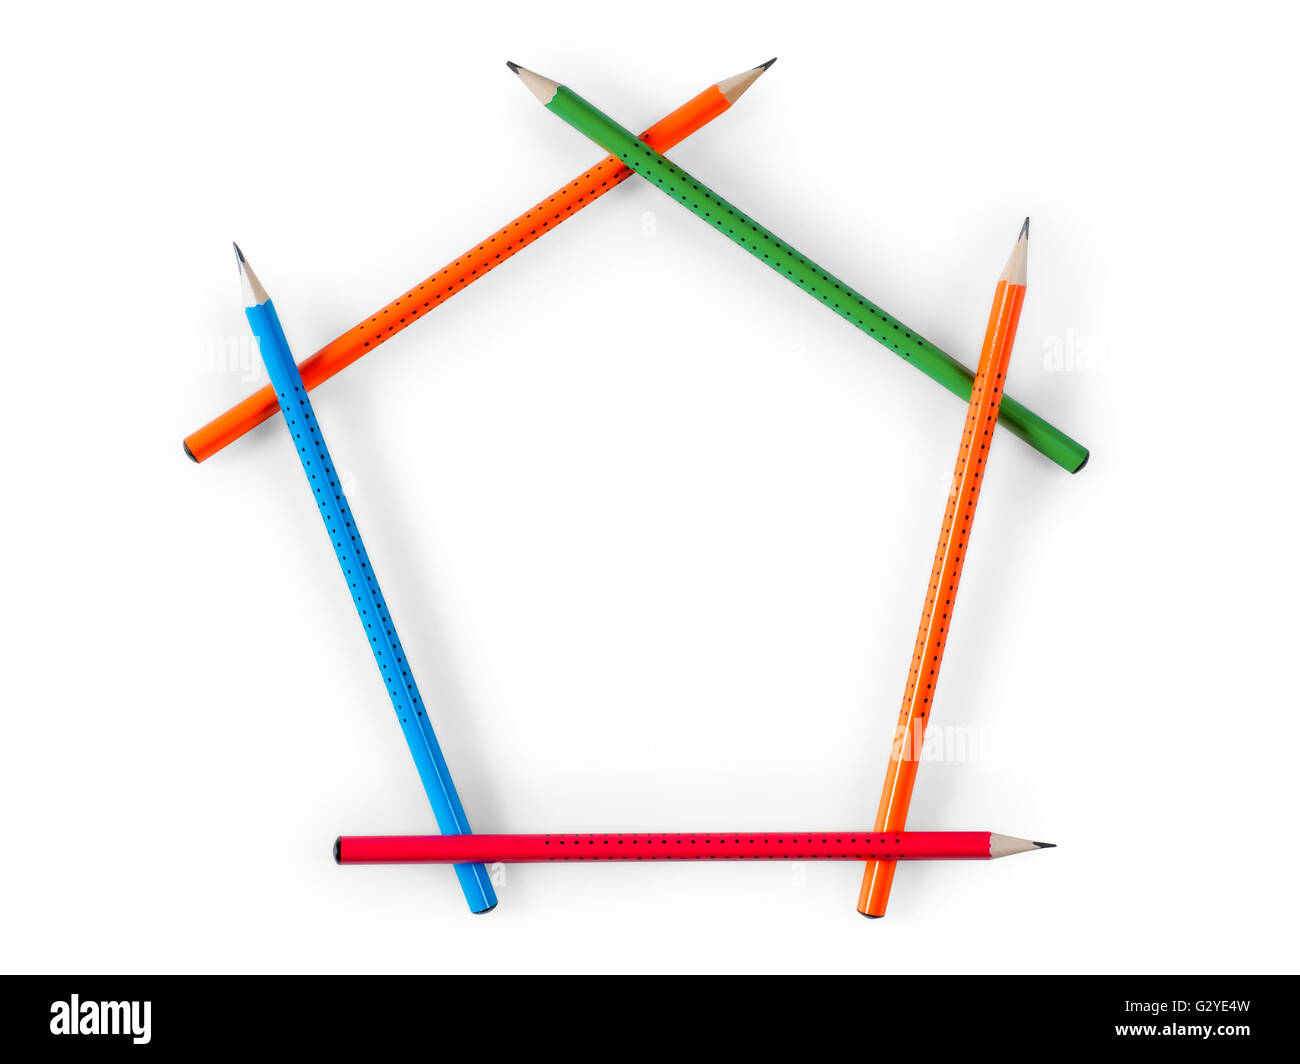 Pentagonal frame of pencils in the shape of a house. Isolated on white with clipping path Stock Photo